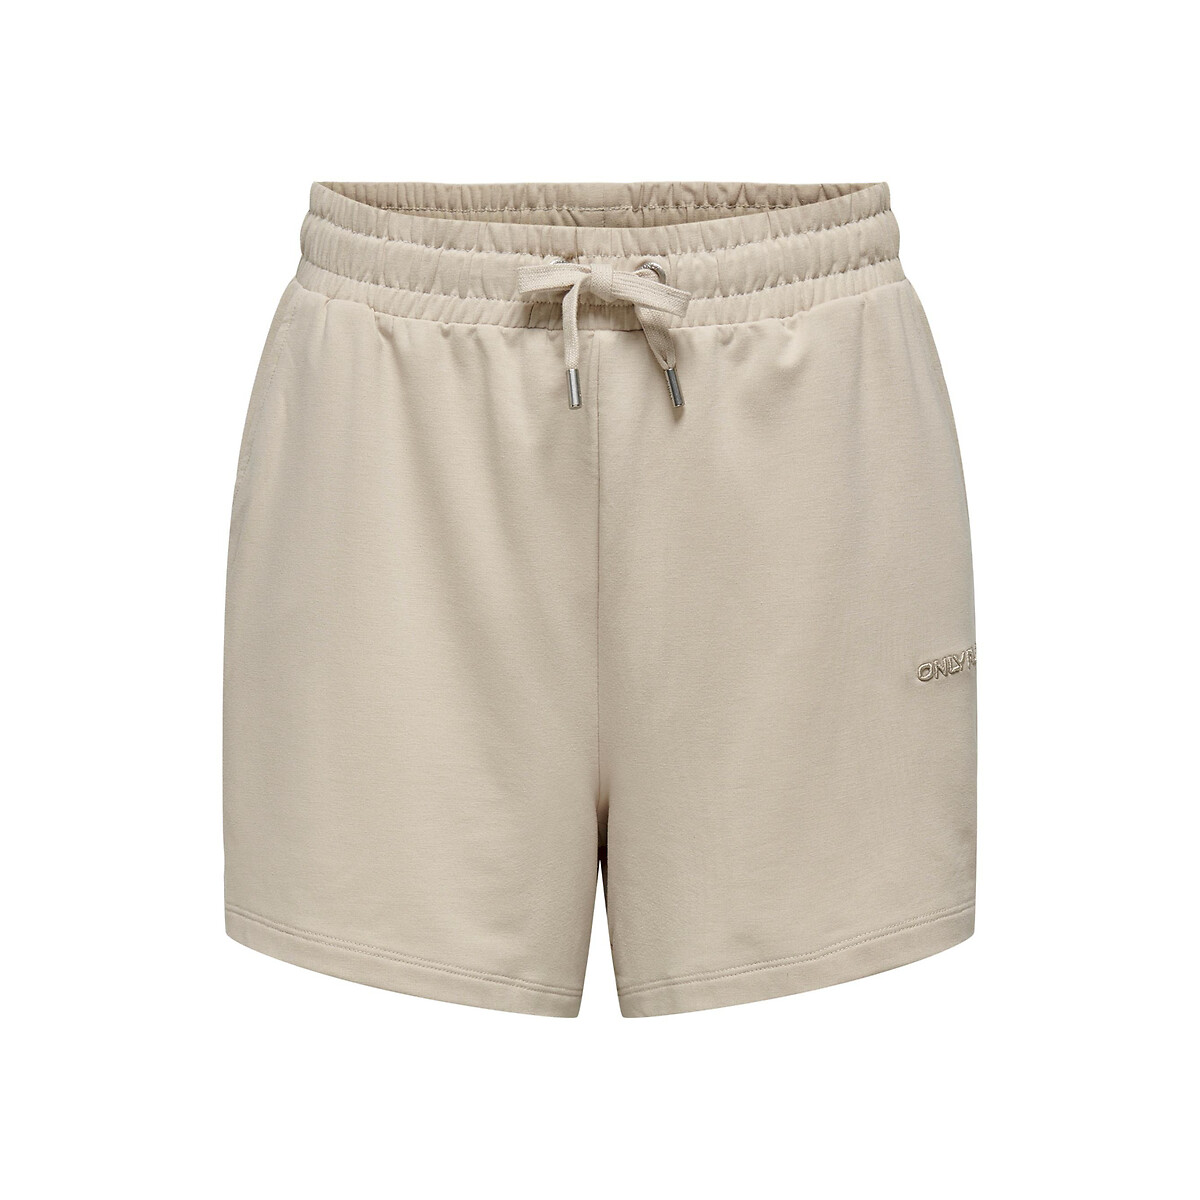 Only play Short Frei Logo, hoge taille